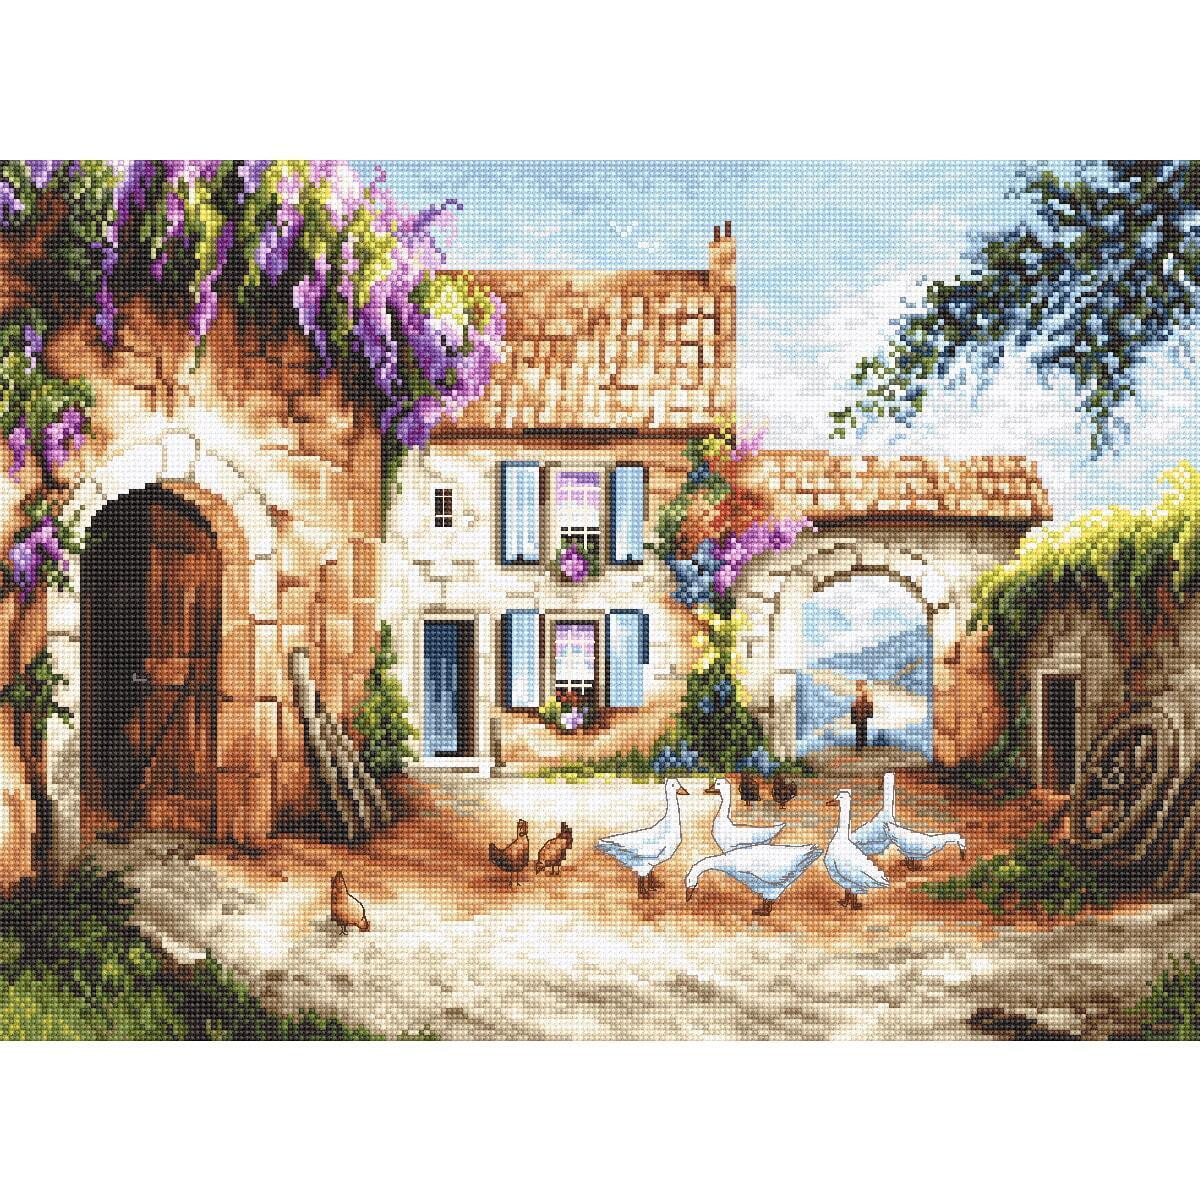 Letistitch counted cross stitch kit "Village",...